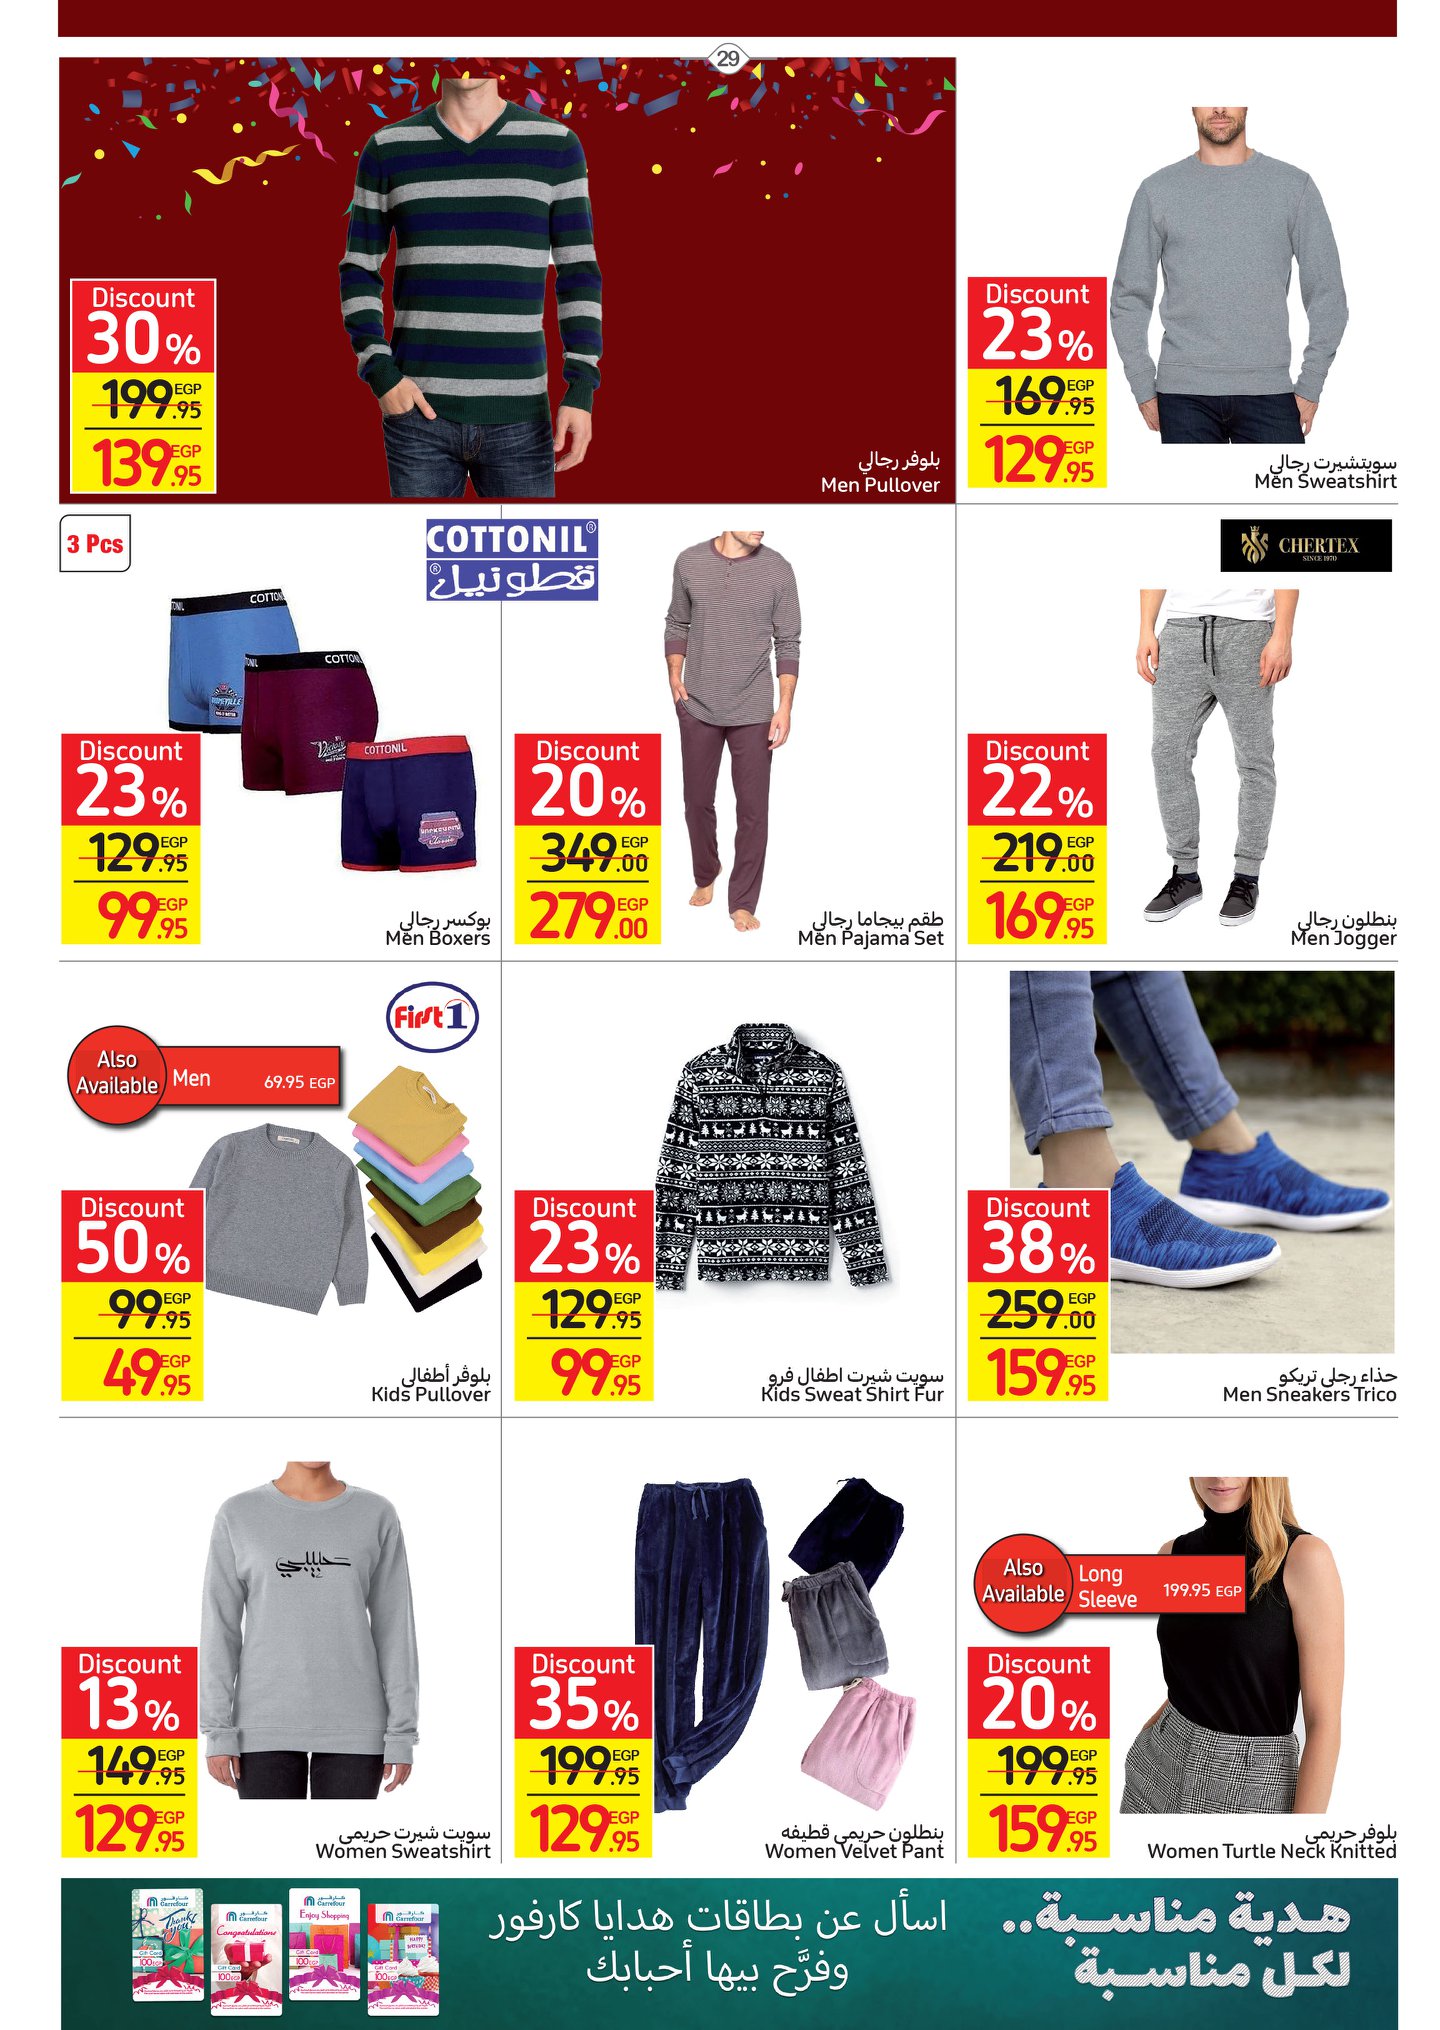 Carrefour magazine offers complete with 50% discounts and a surprise purchase in convenient installments without interest 34